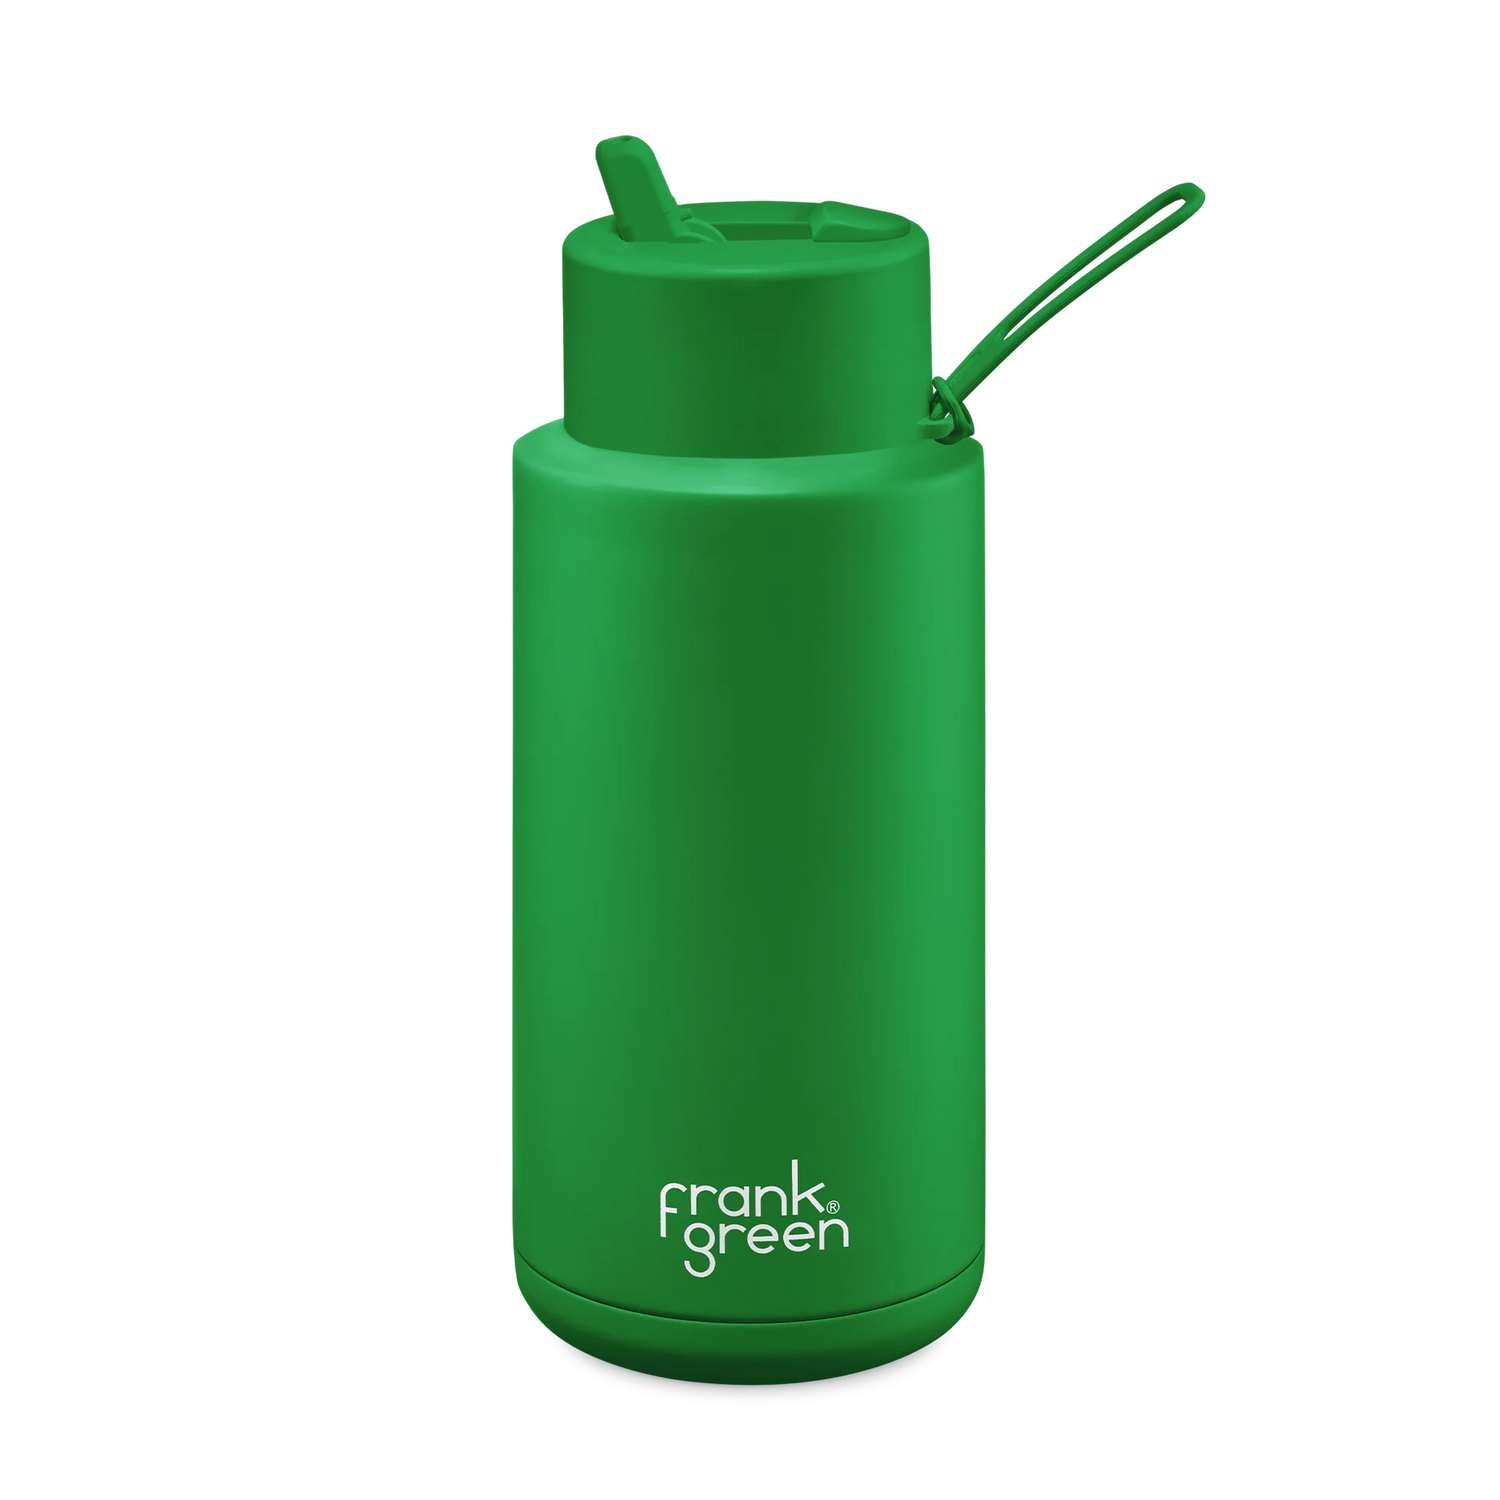 Frank Green Stainless Steel Ceramic Reusable Bottle Evergreen With Straw And Strap 34oz/1,000ml